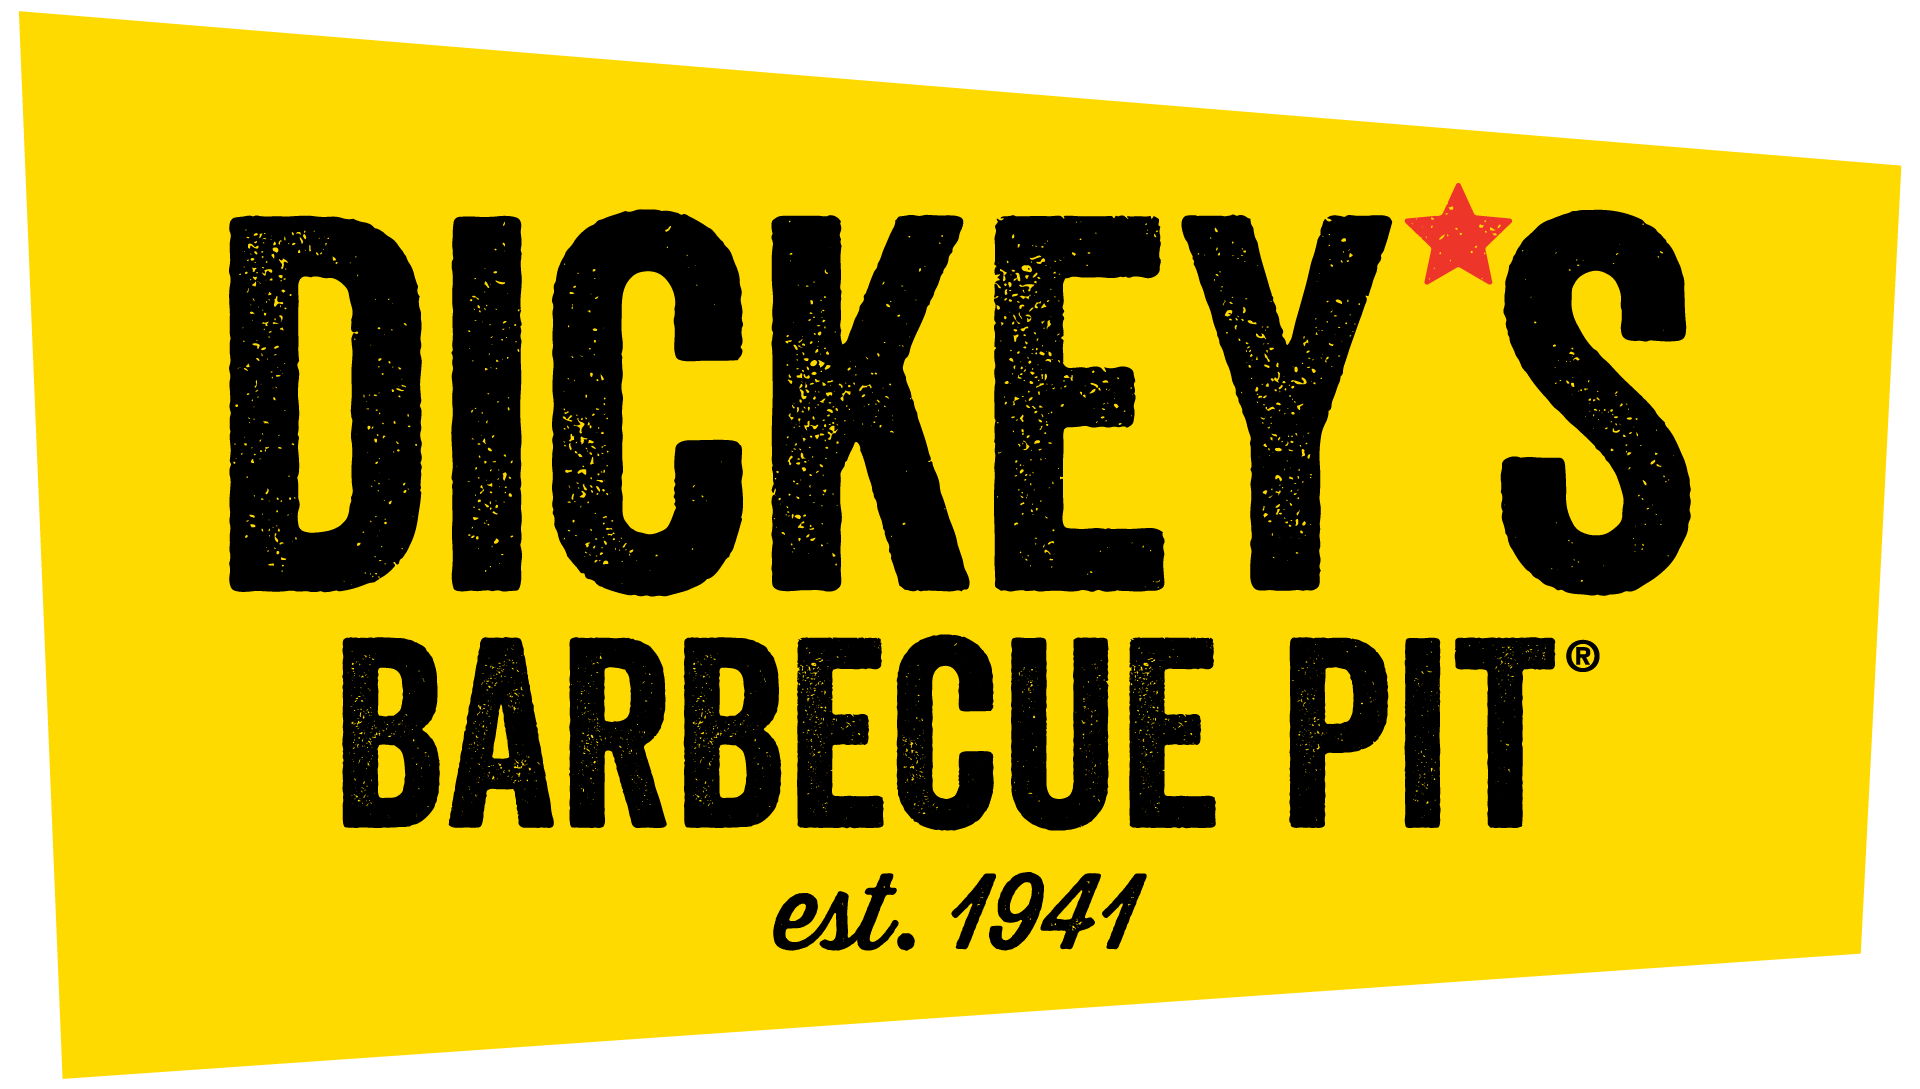 Dickey’s Barbecue Co